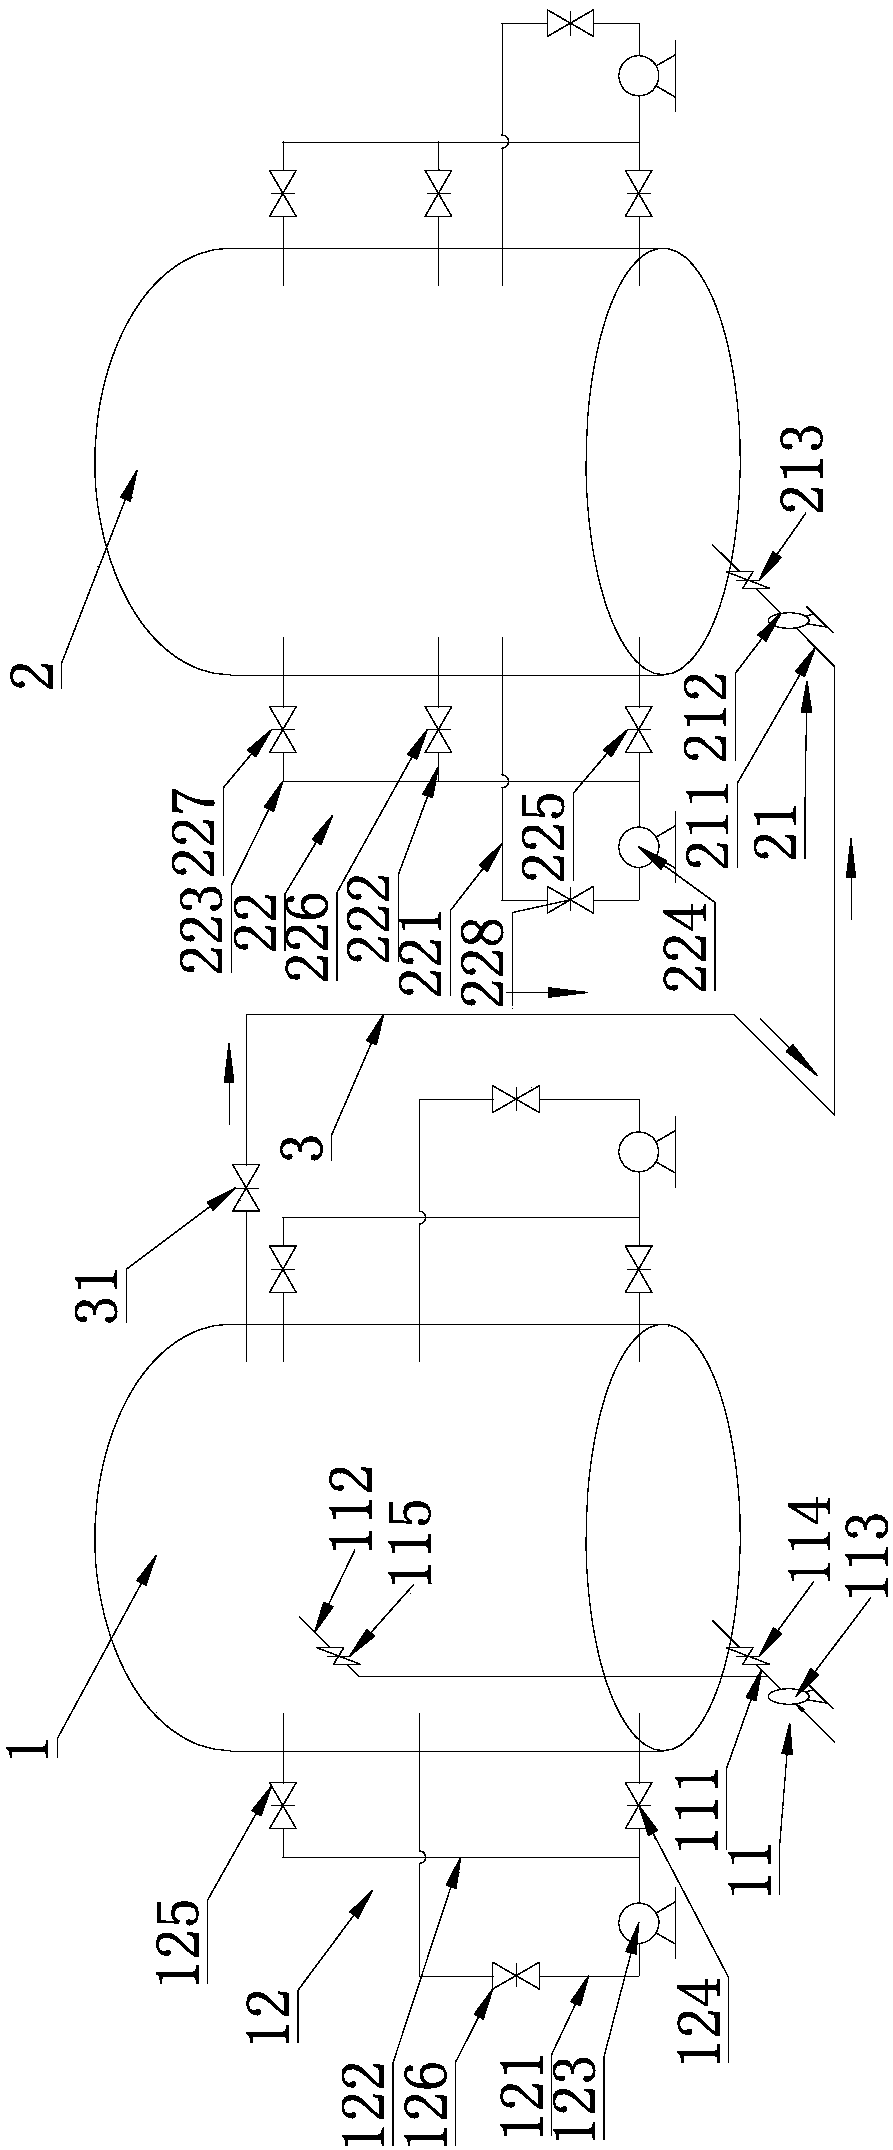 Circulating and mixing device in two-phase anaerobic digester for efficiently promoting acid production